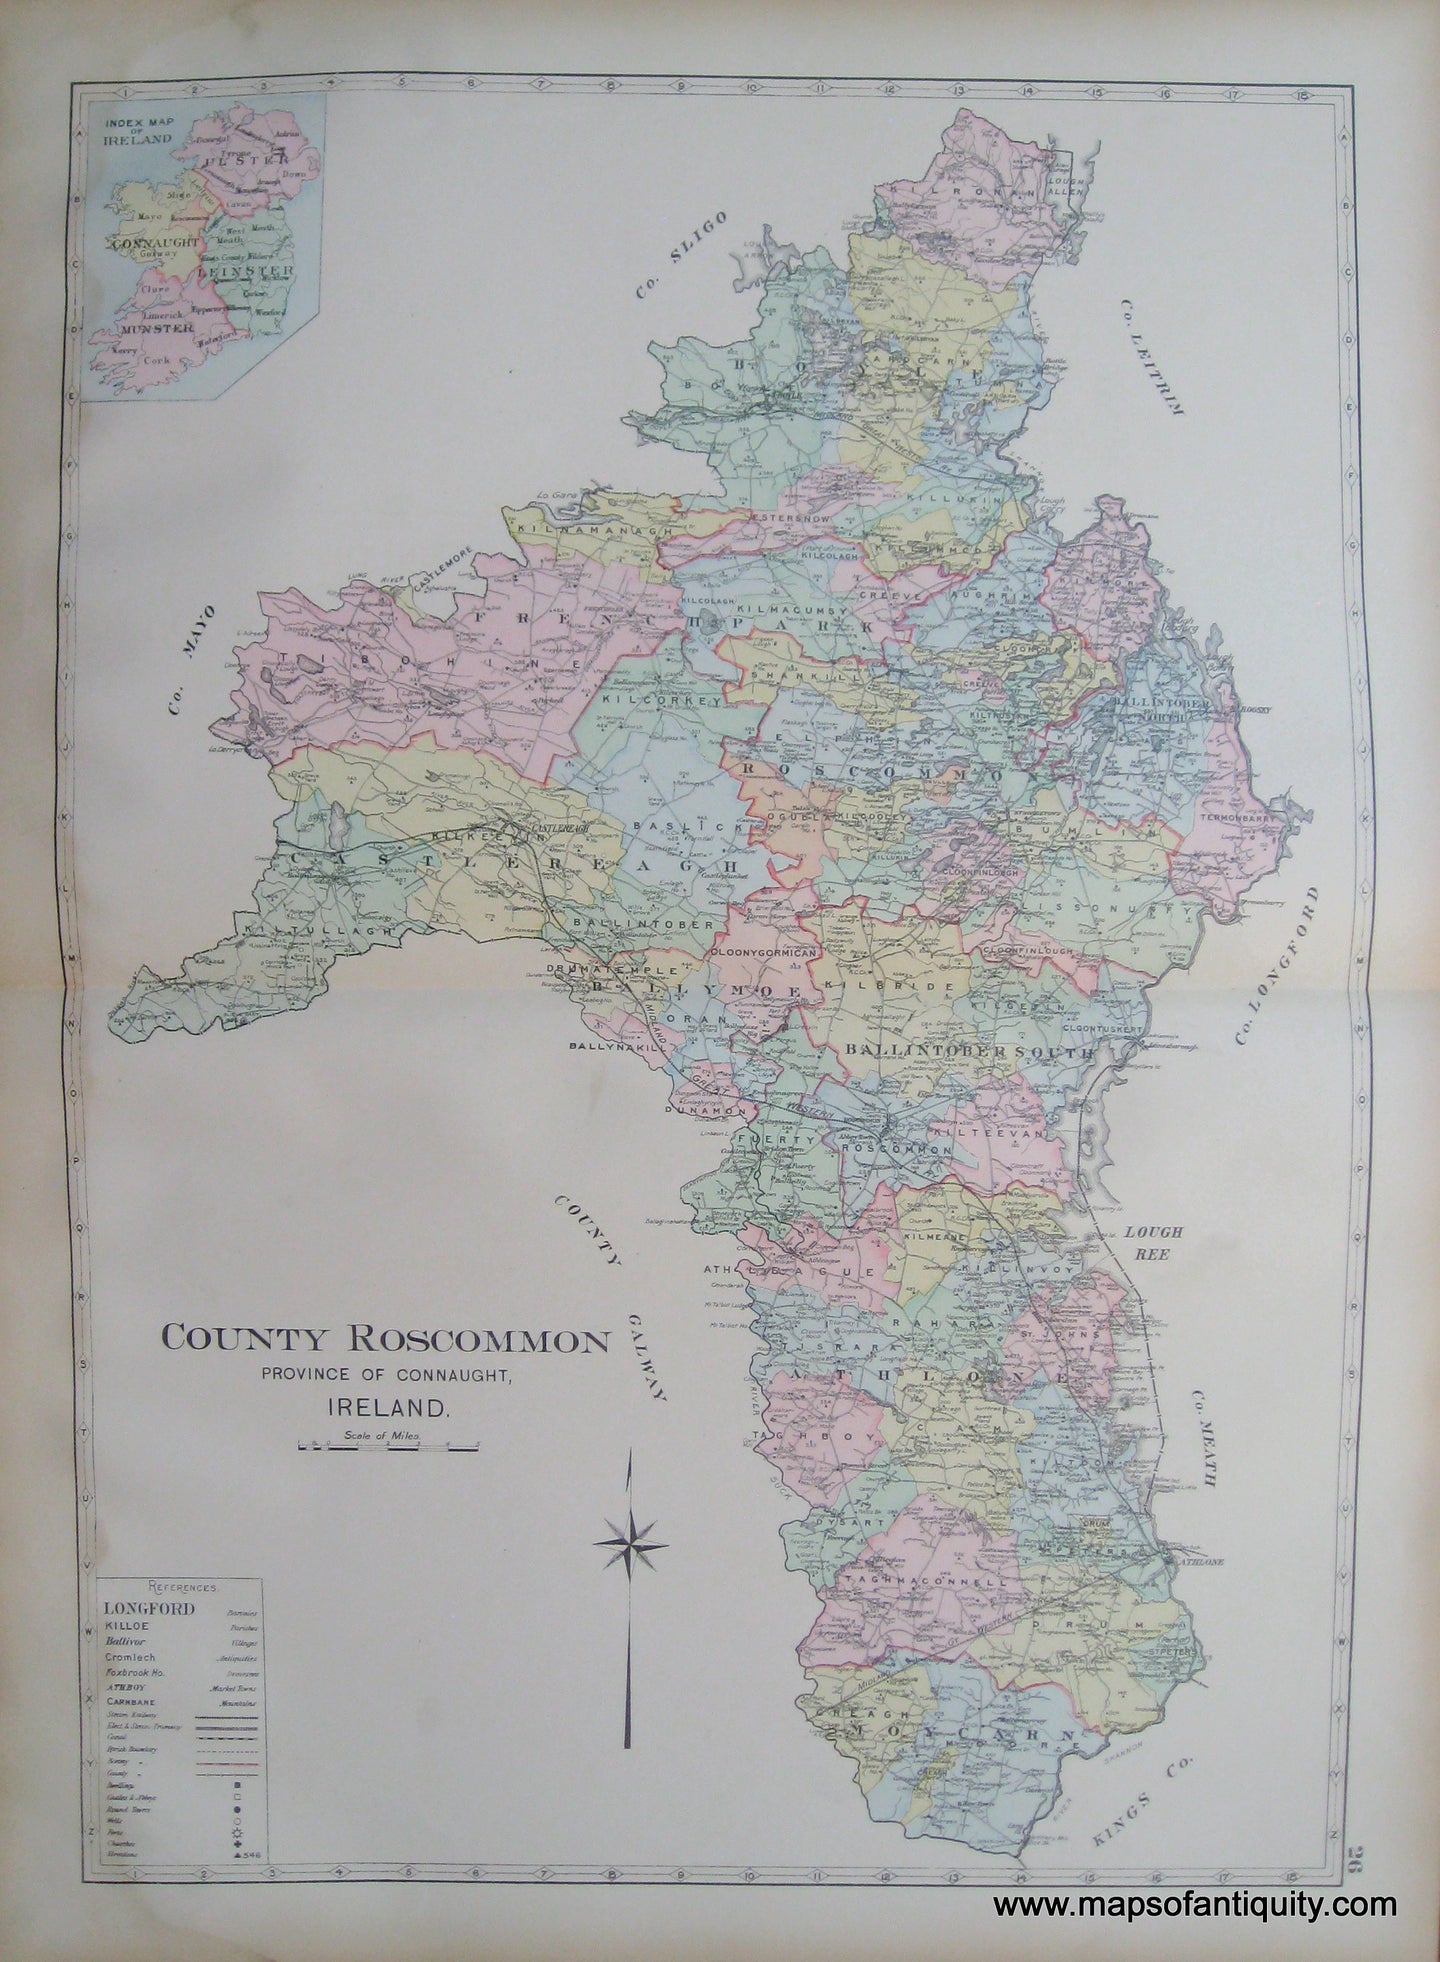 Antique-Map-County-Roscommon-Province-of-Connaught-Ireland.-Richards-1901-Maps-Of-Antiquity